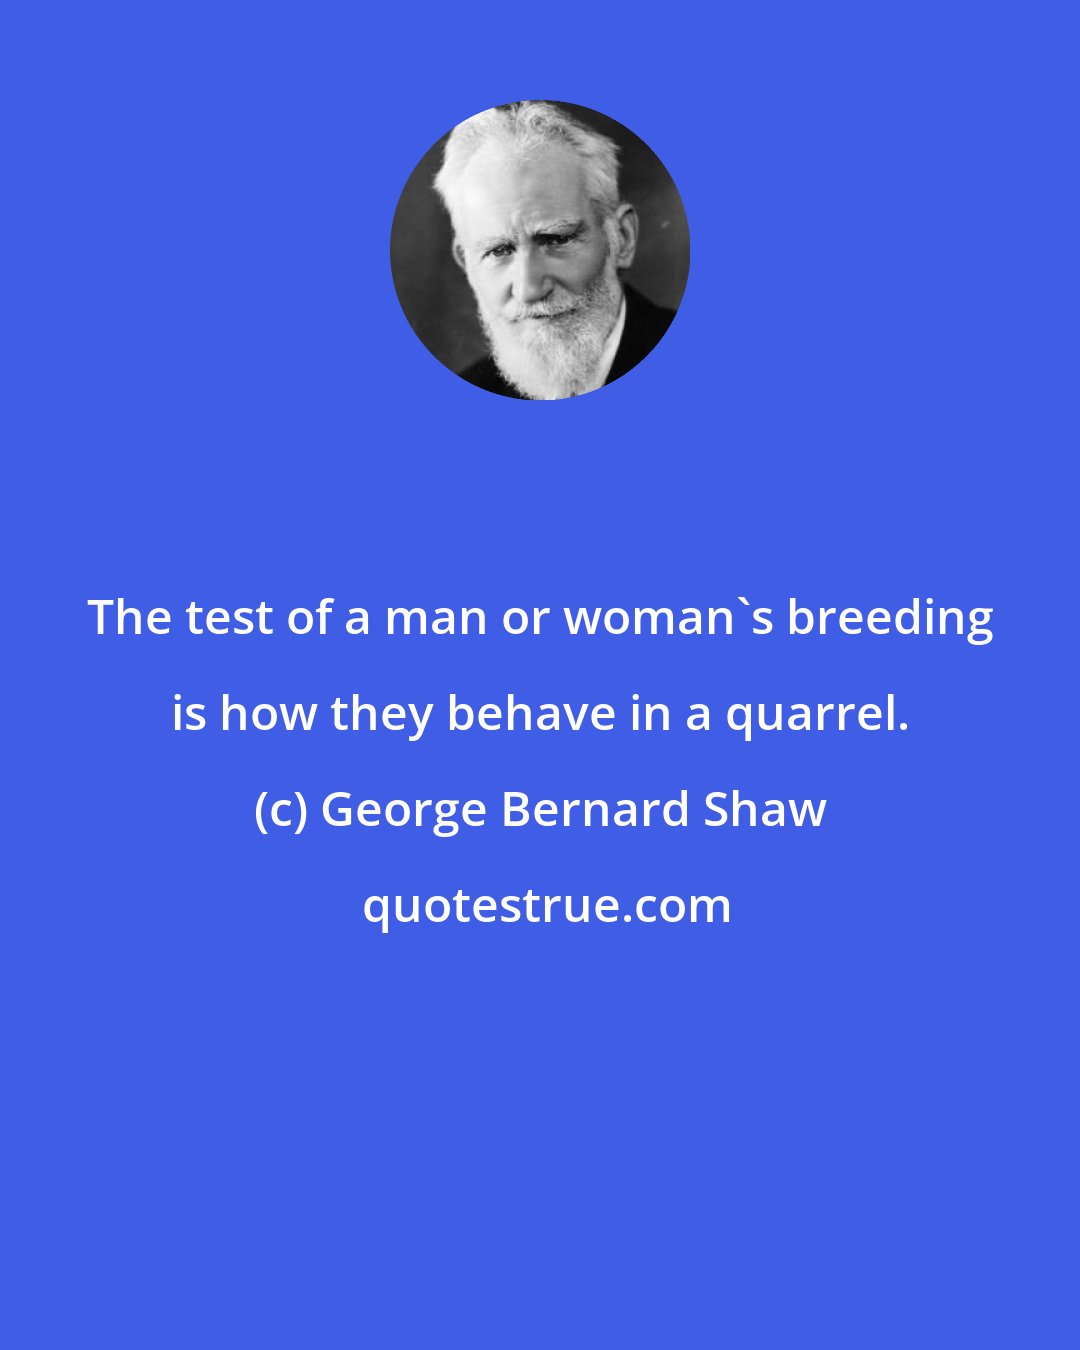 George Bernard Shaw: The test of a man or woman's breeding is how they behave in a quarrel.